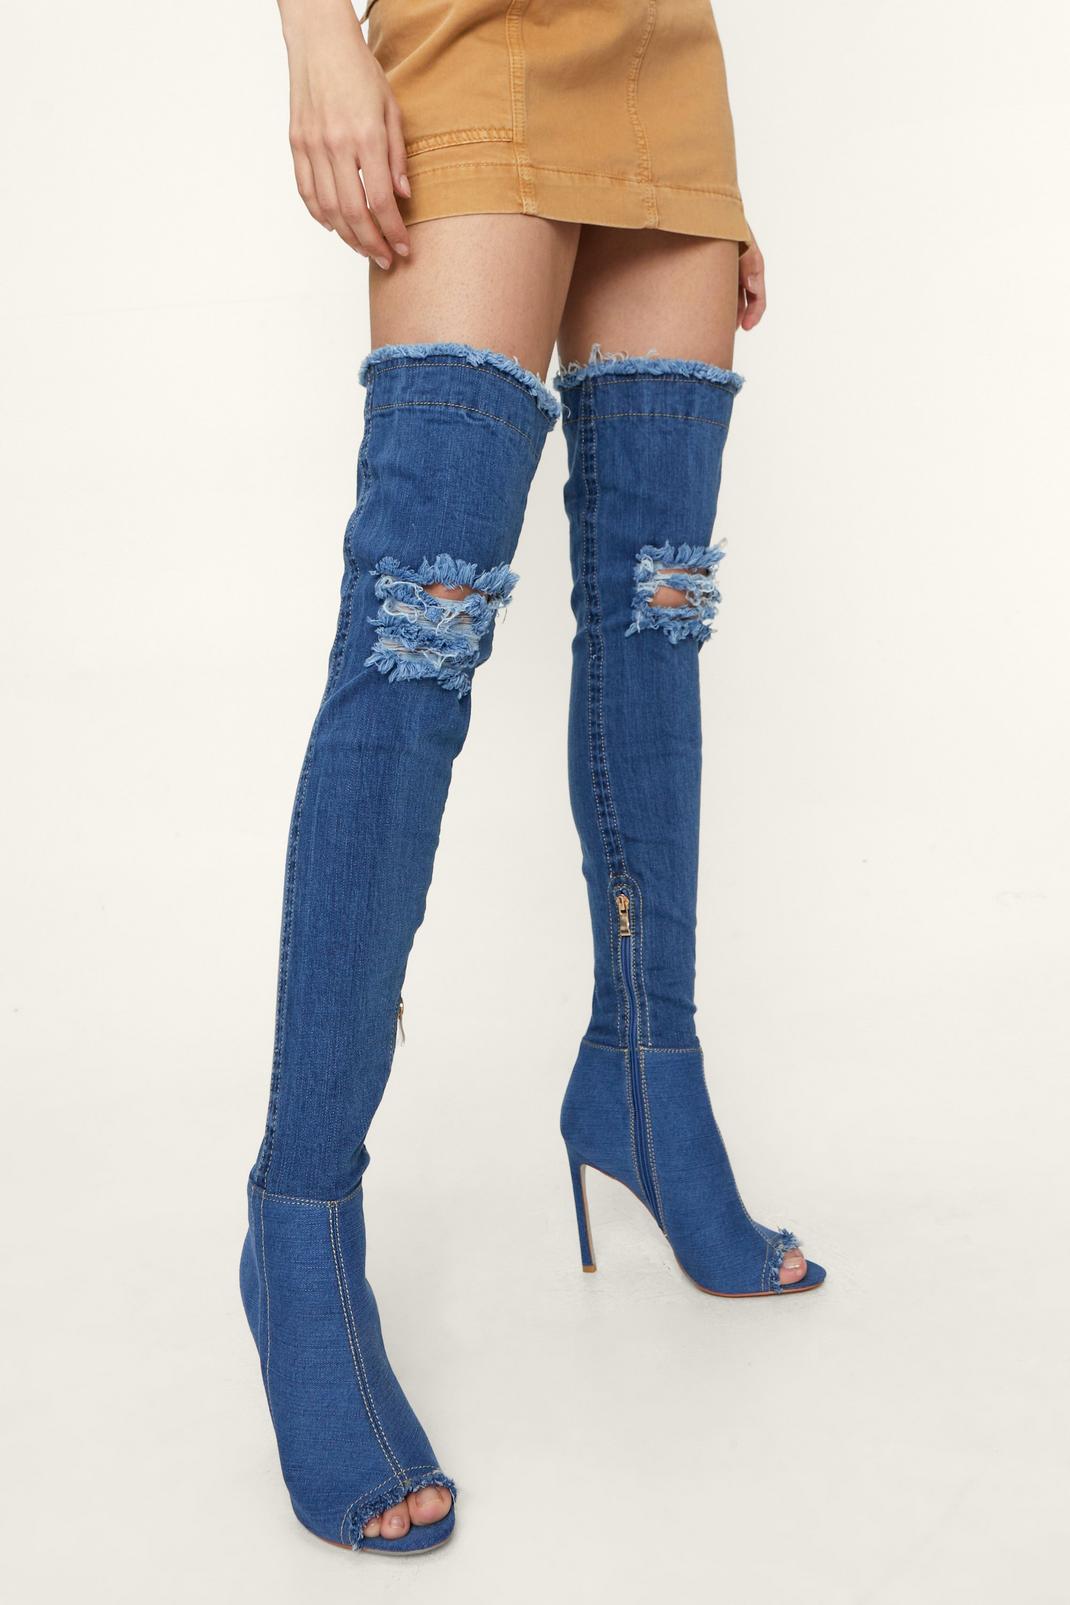 340 Denim Open Toe Over The Knee Boots  image number 2